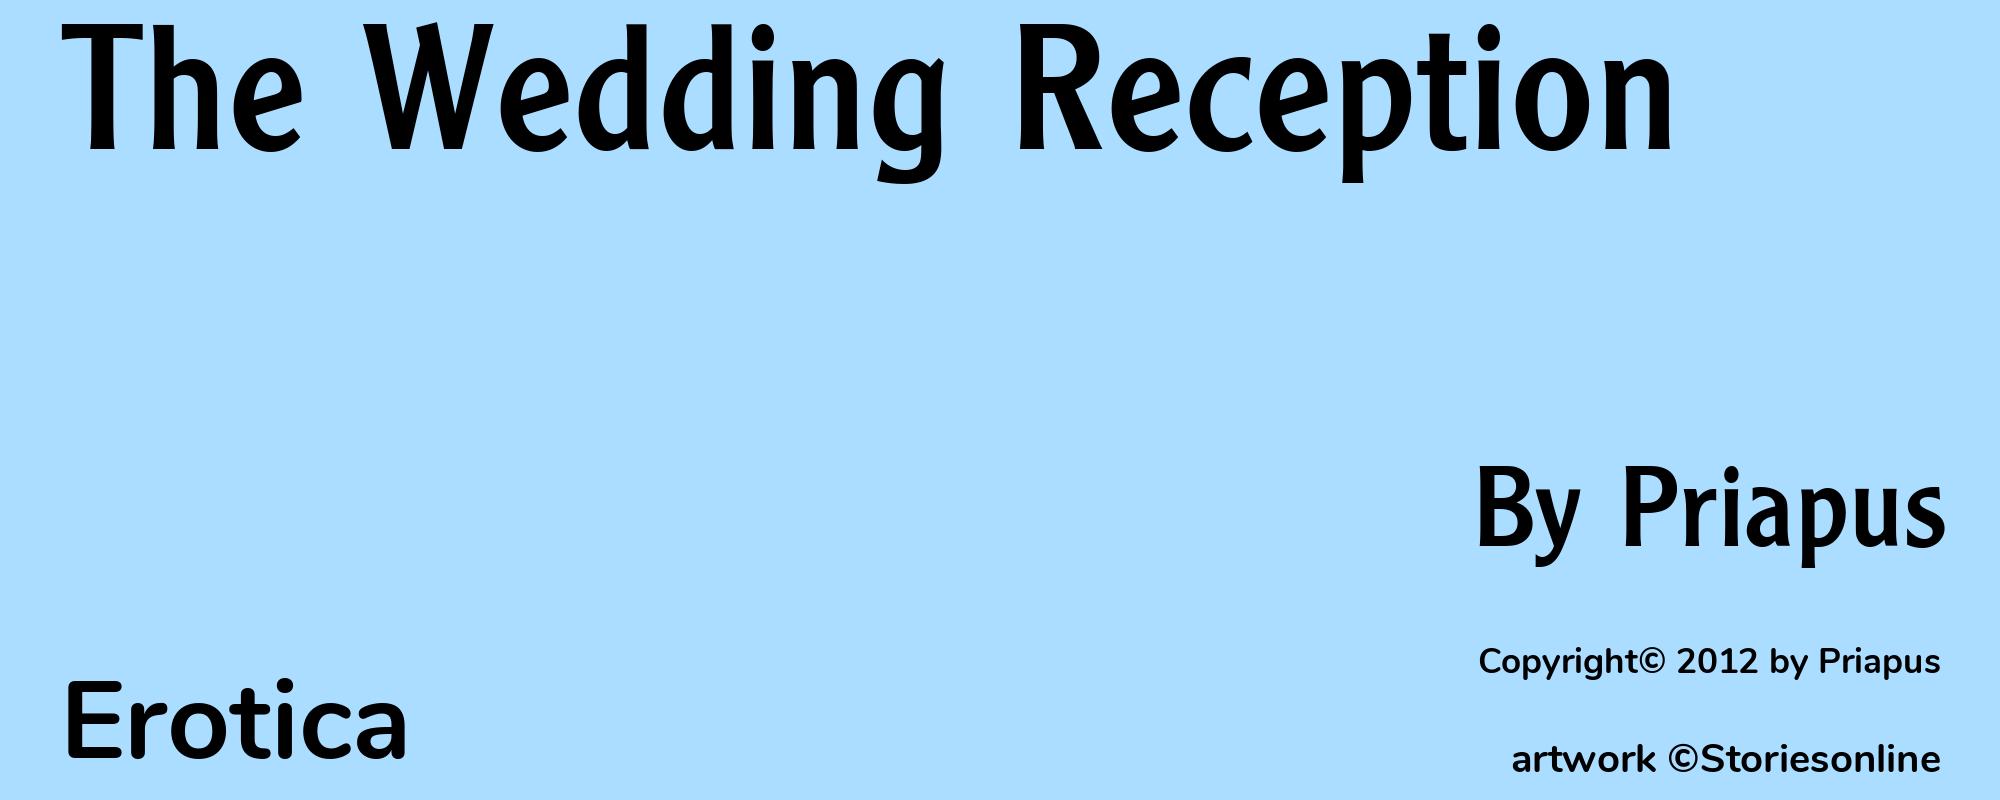 The Wedding Reception - Cover